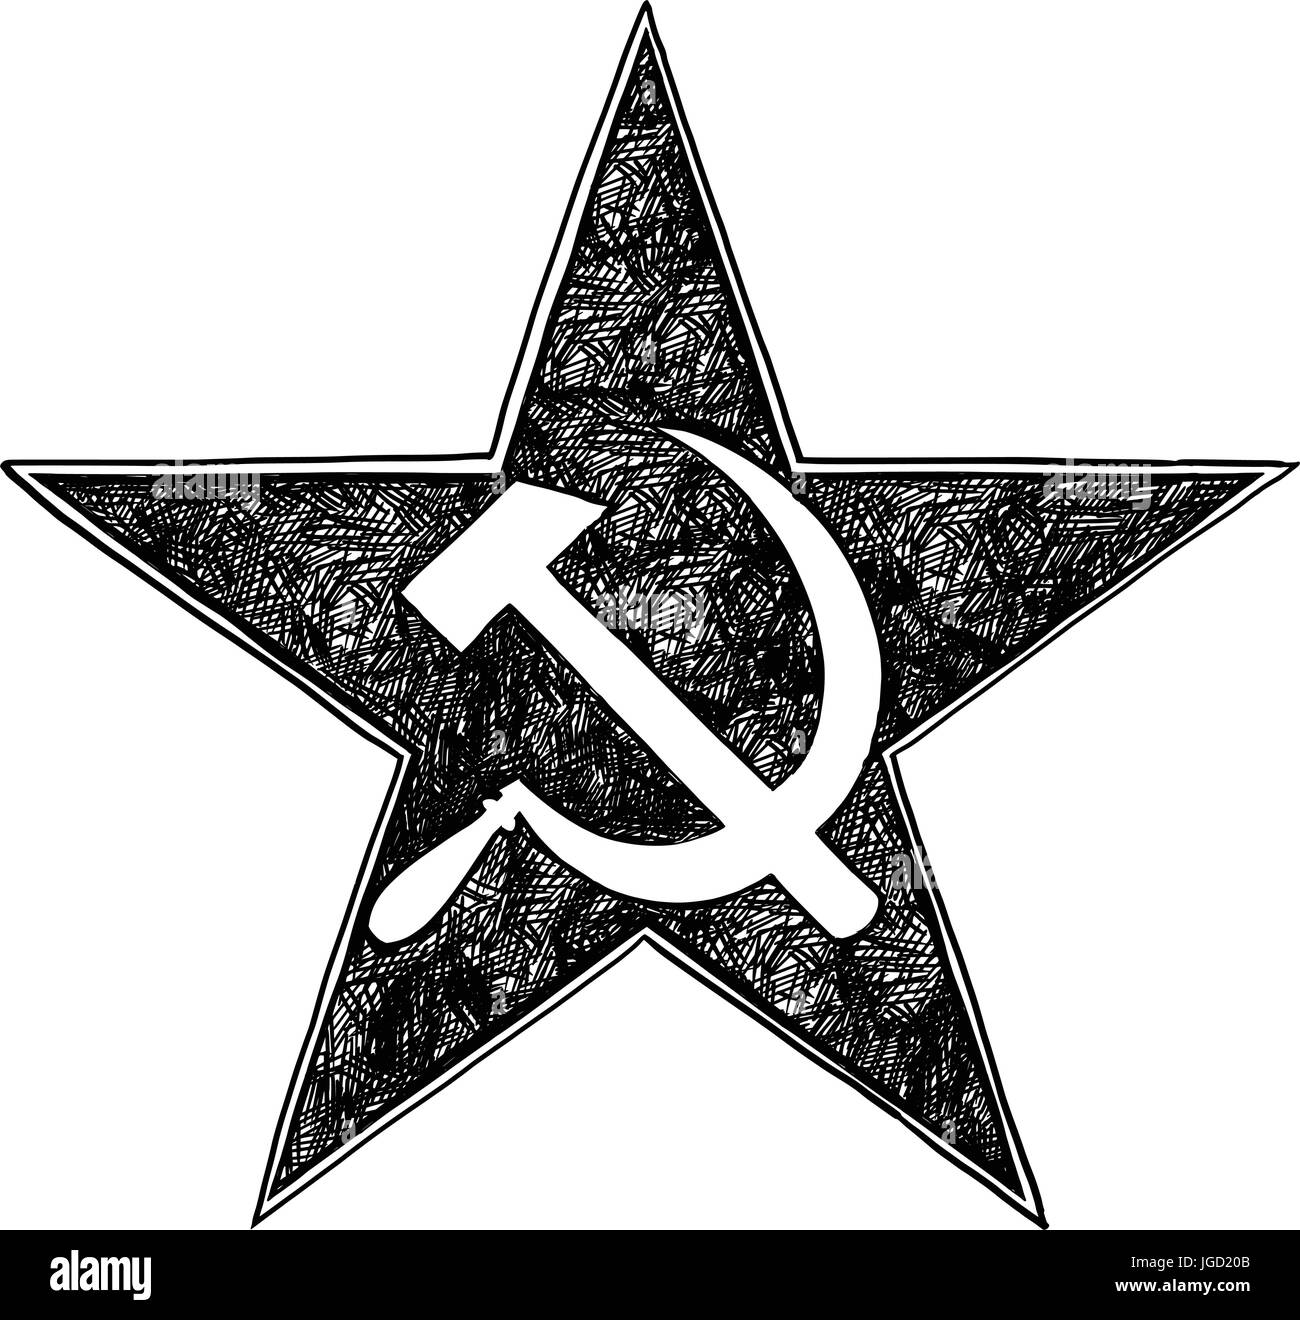 Hammer and sickle inside star- symbol of communism and Soviet Union Stock Vector